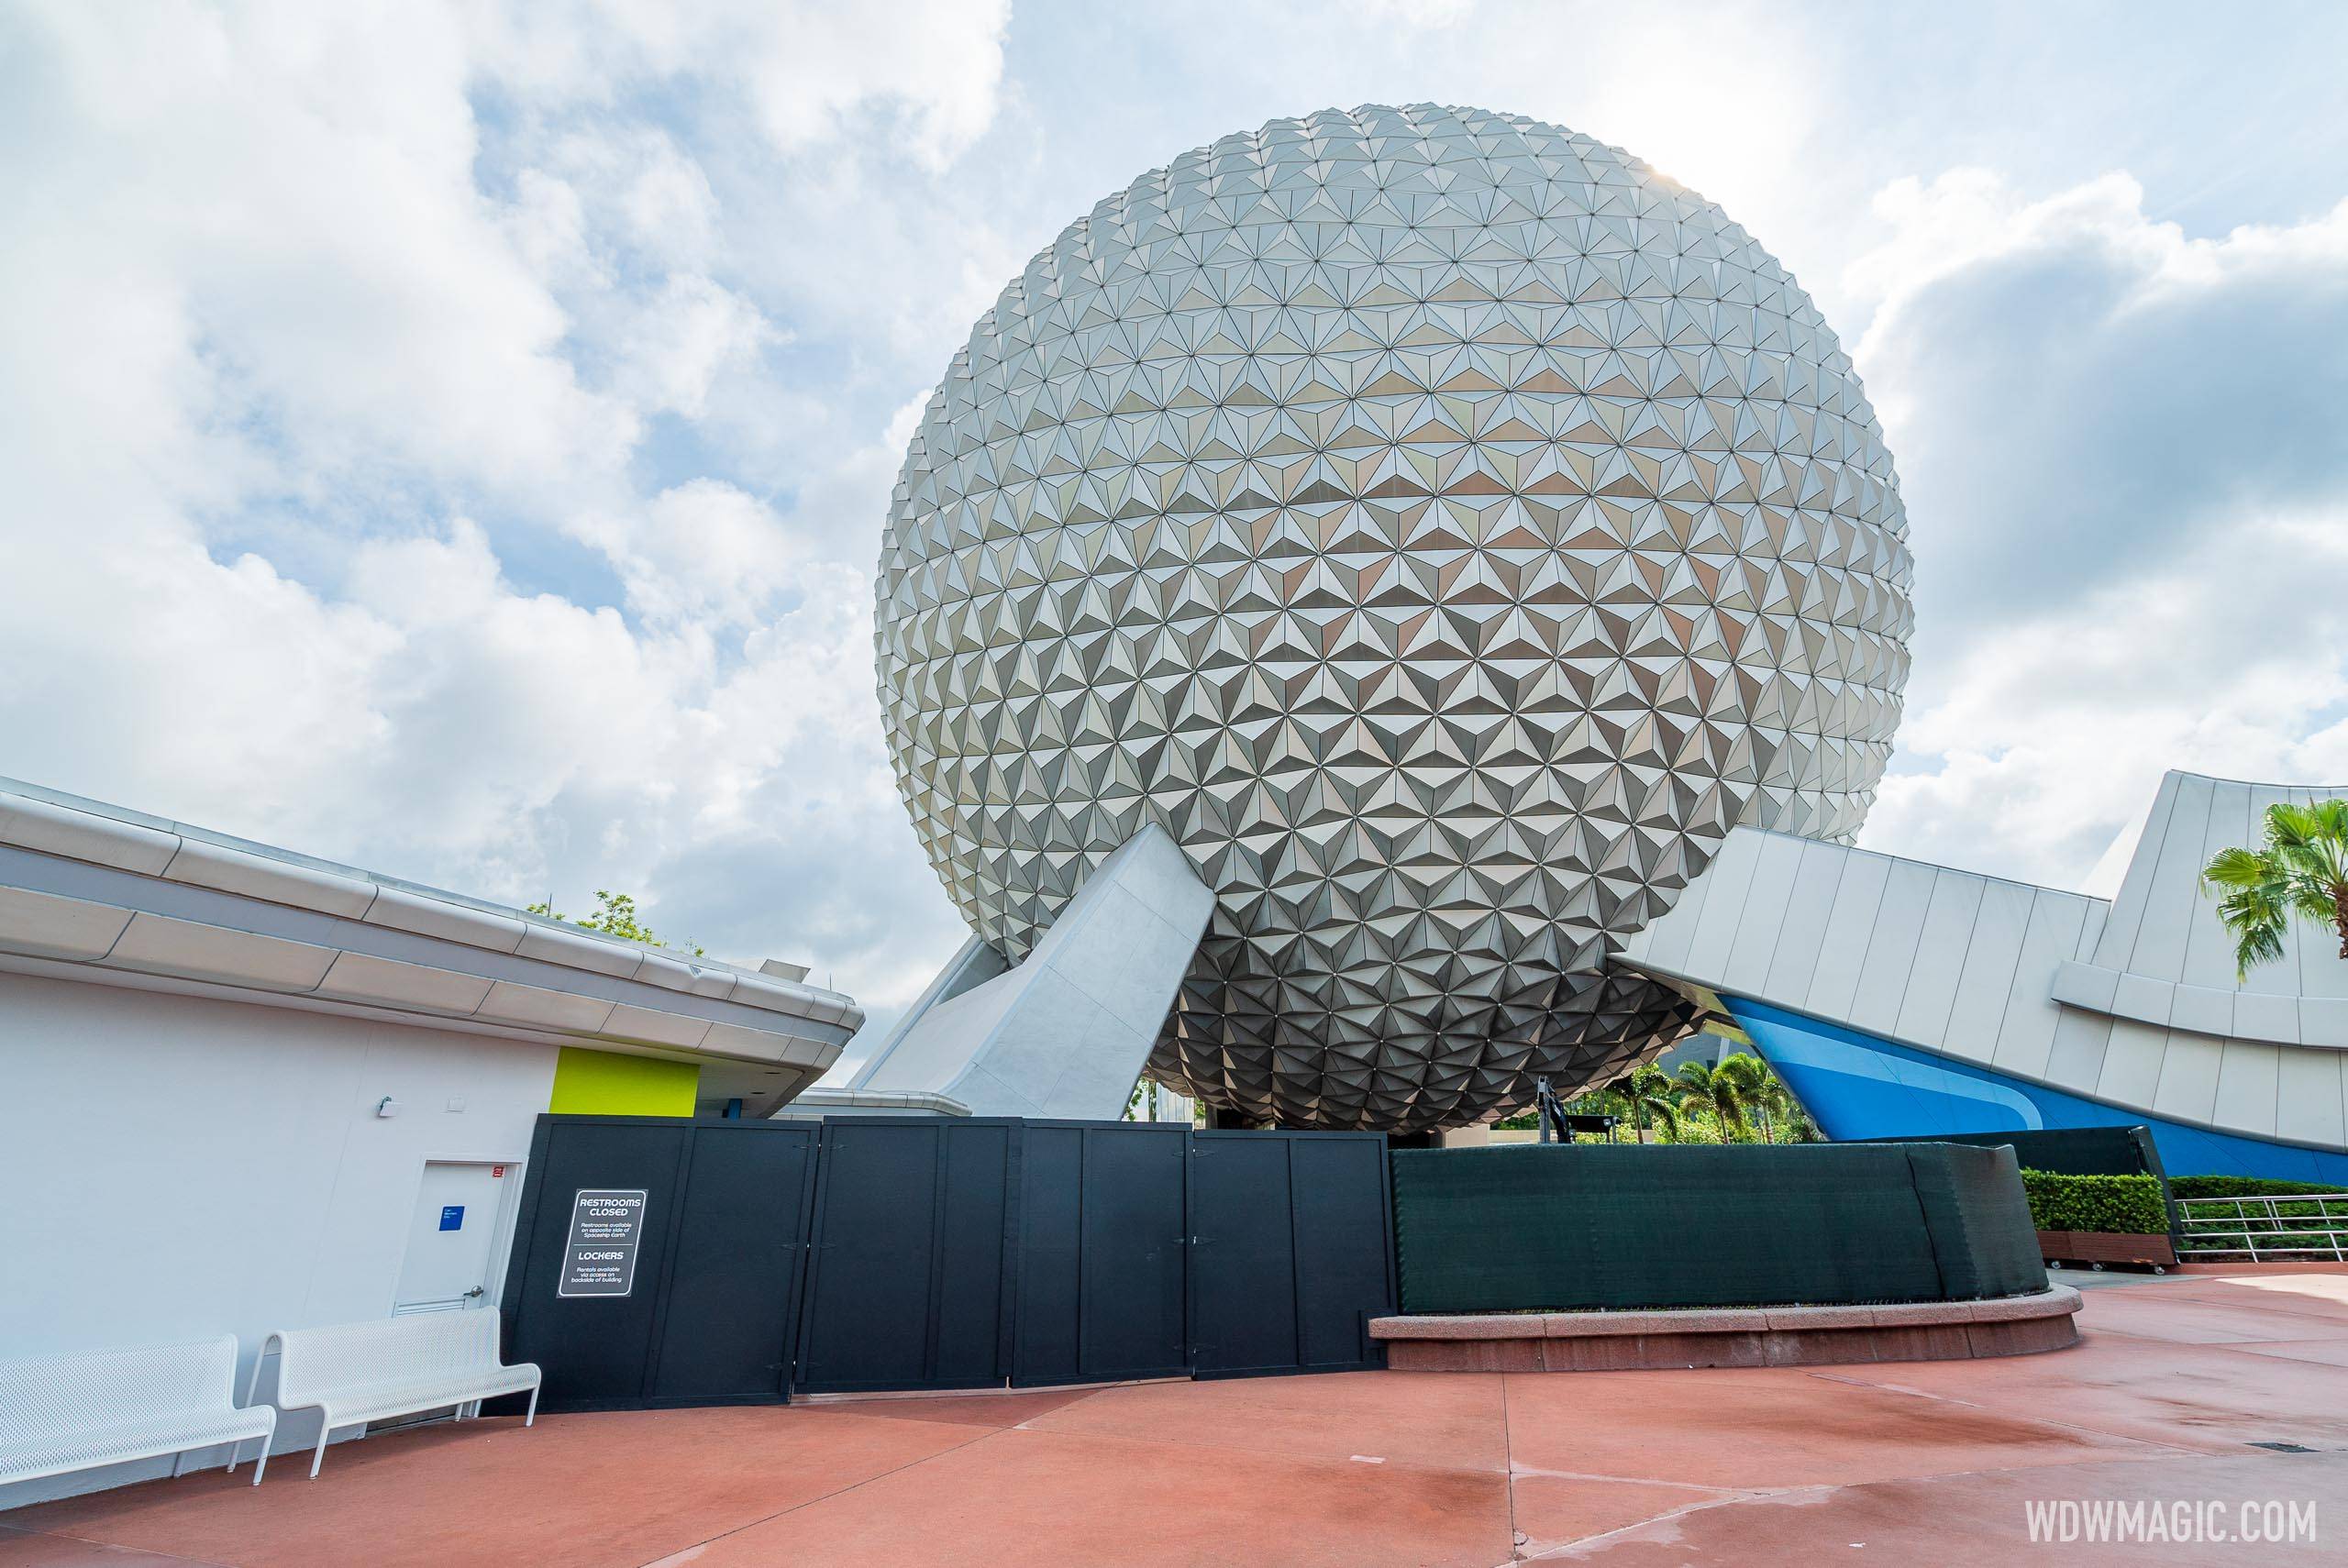 More construction walls up beneath Spaceship Earth along with restroom closure